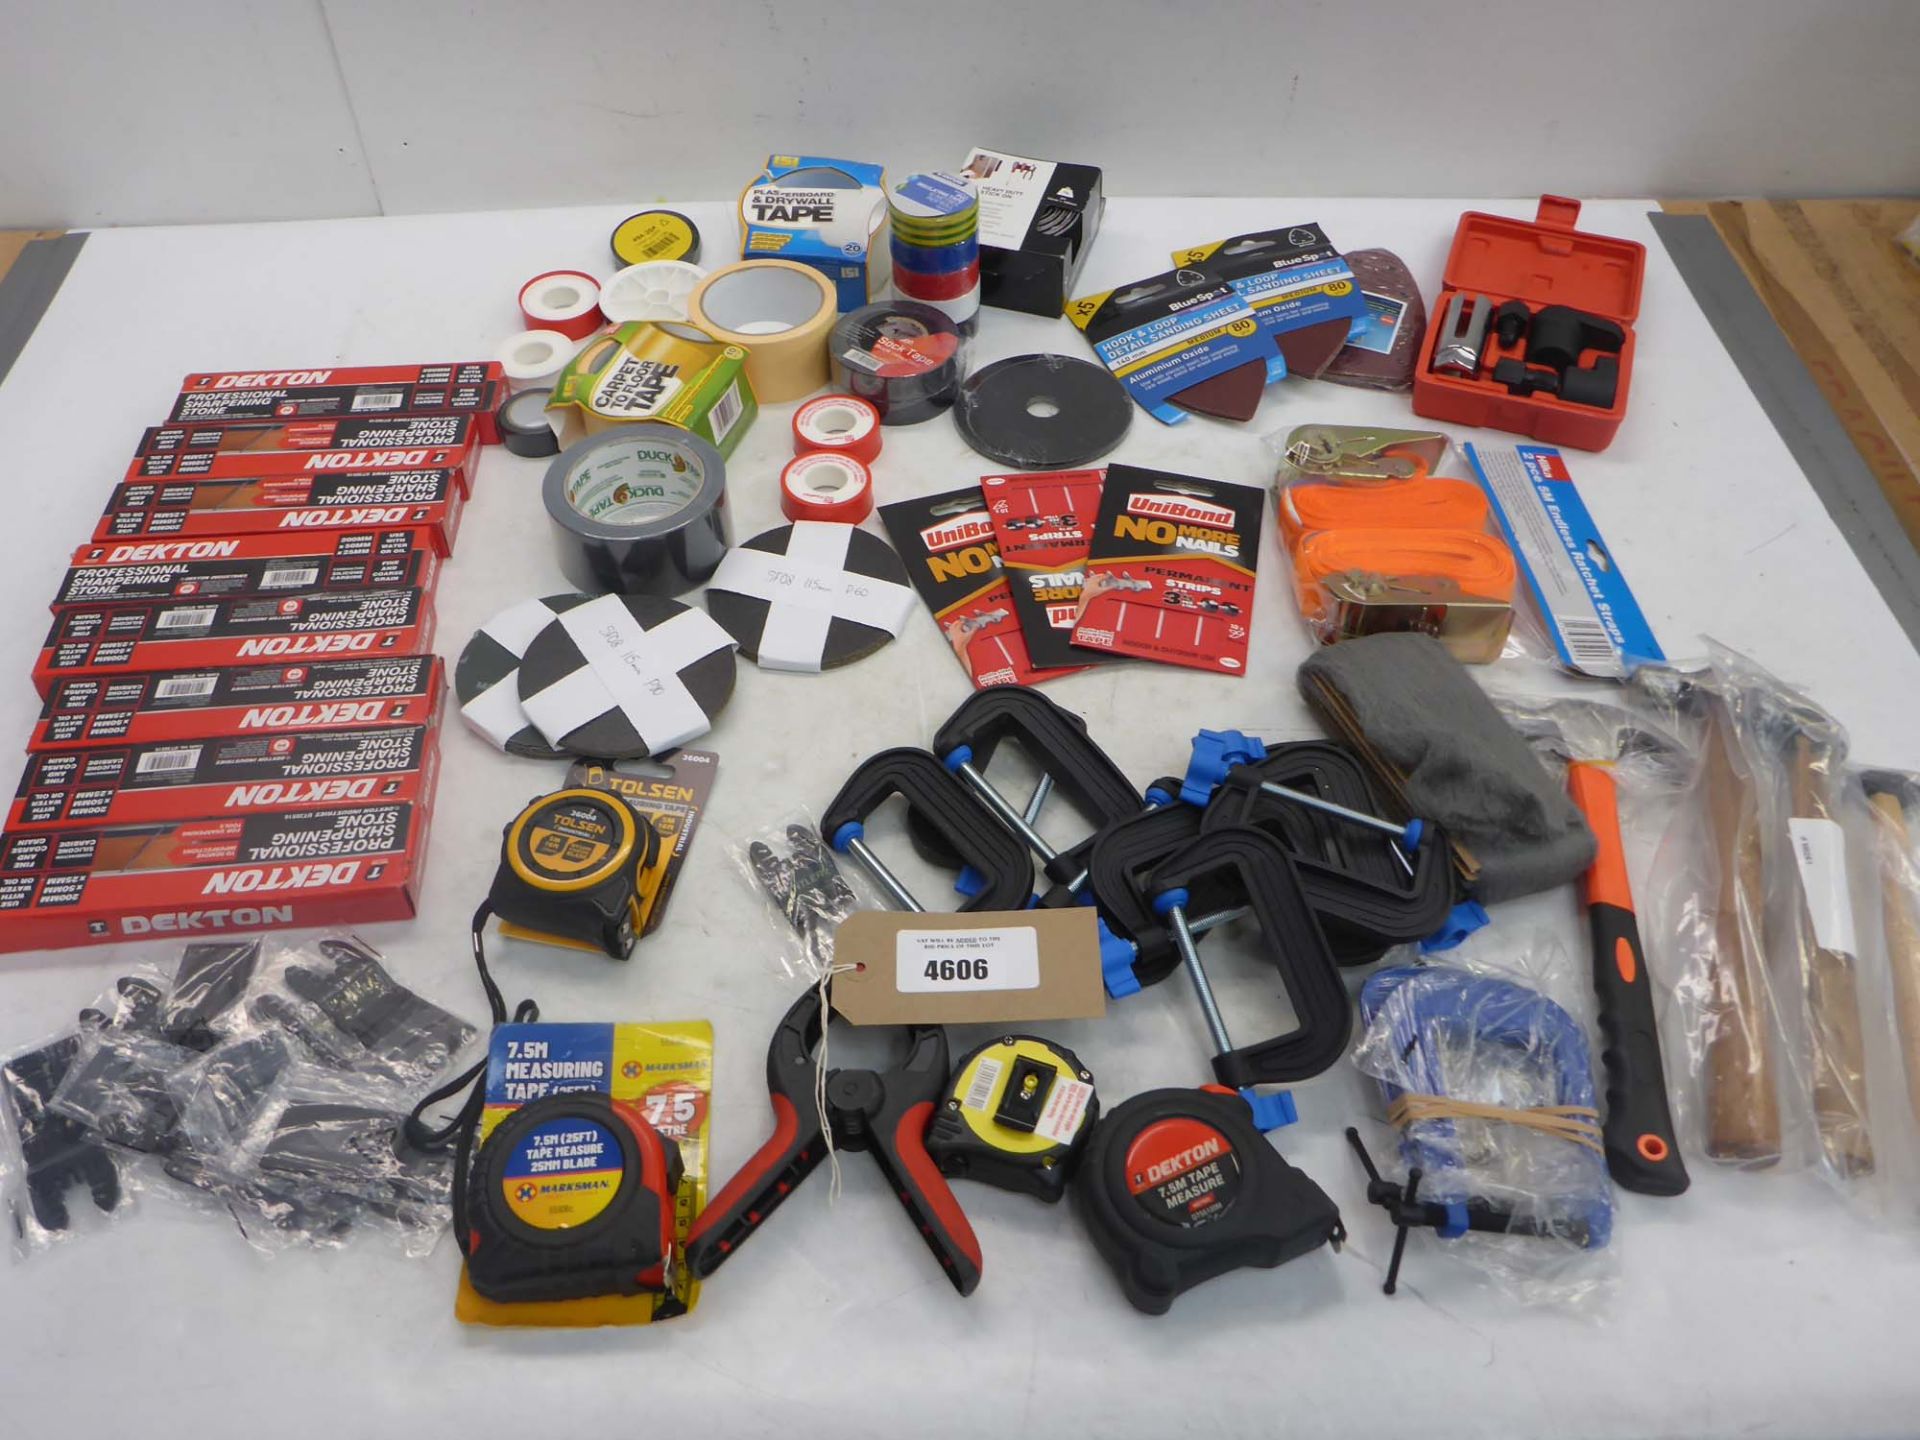 Sharpening stones, multi tool blades, tape measures, adhesive tape, sanding pads, G-clamps, hammers,